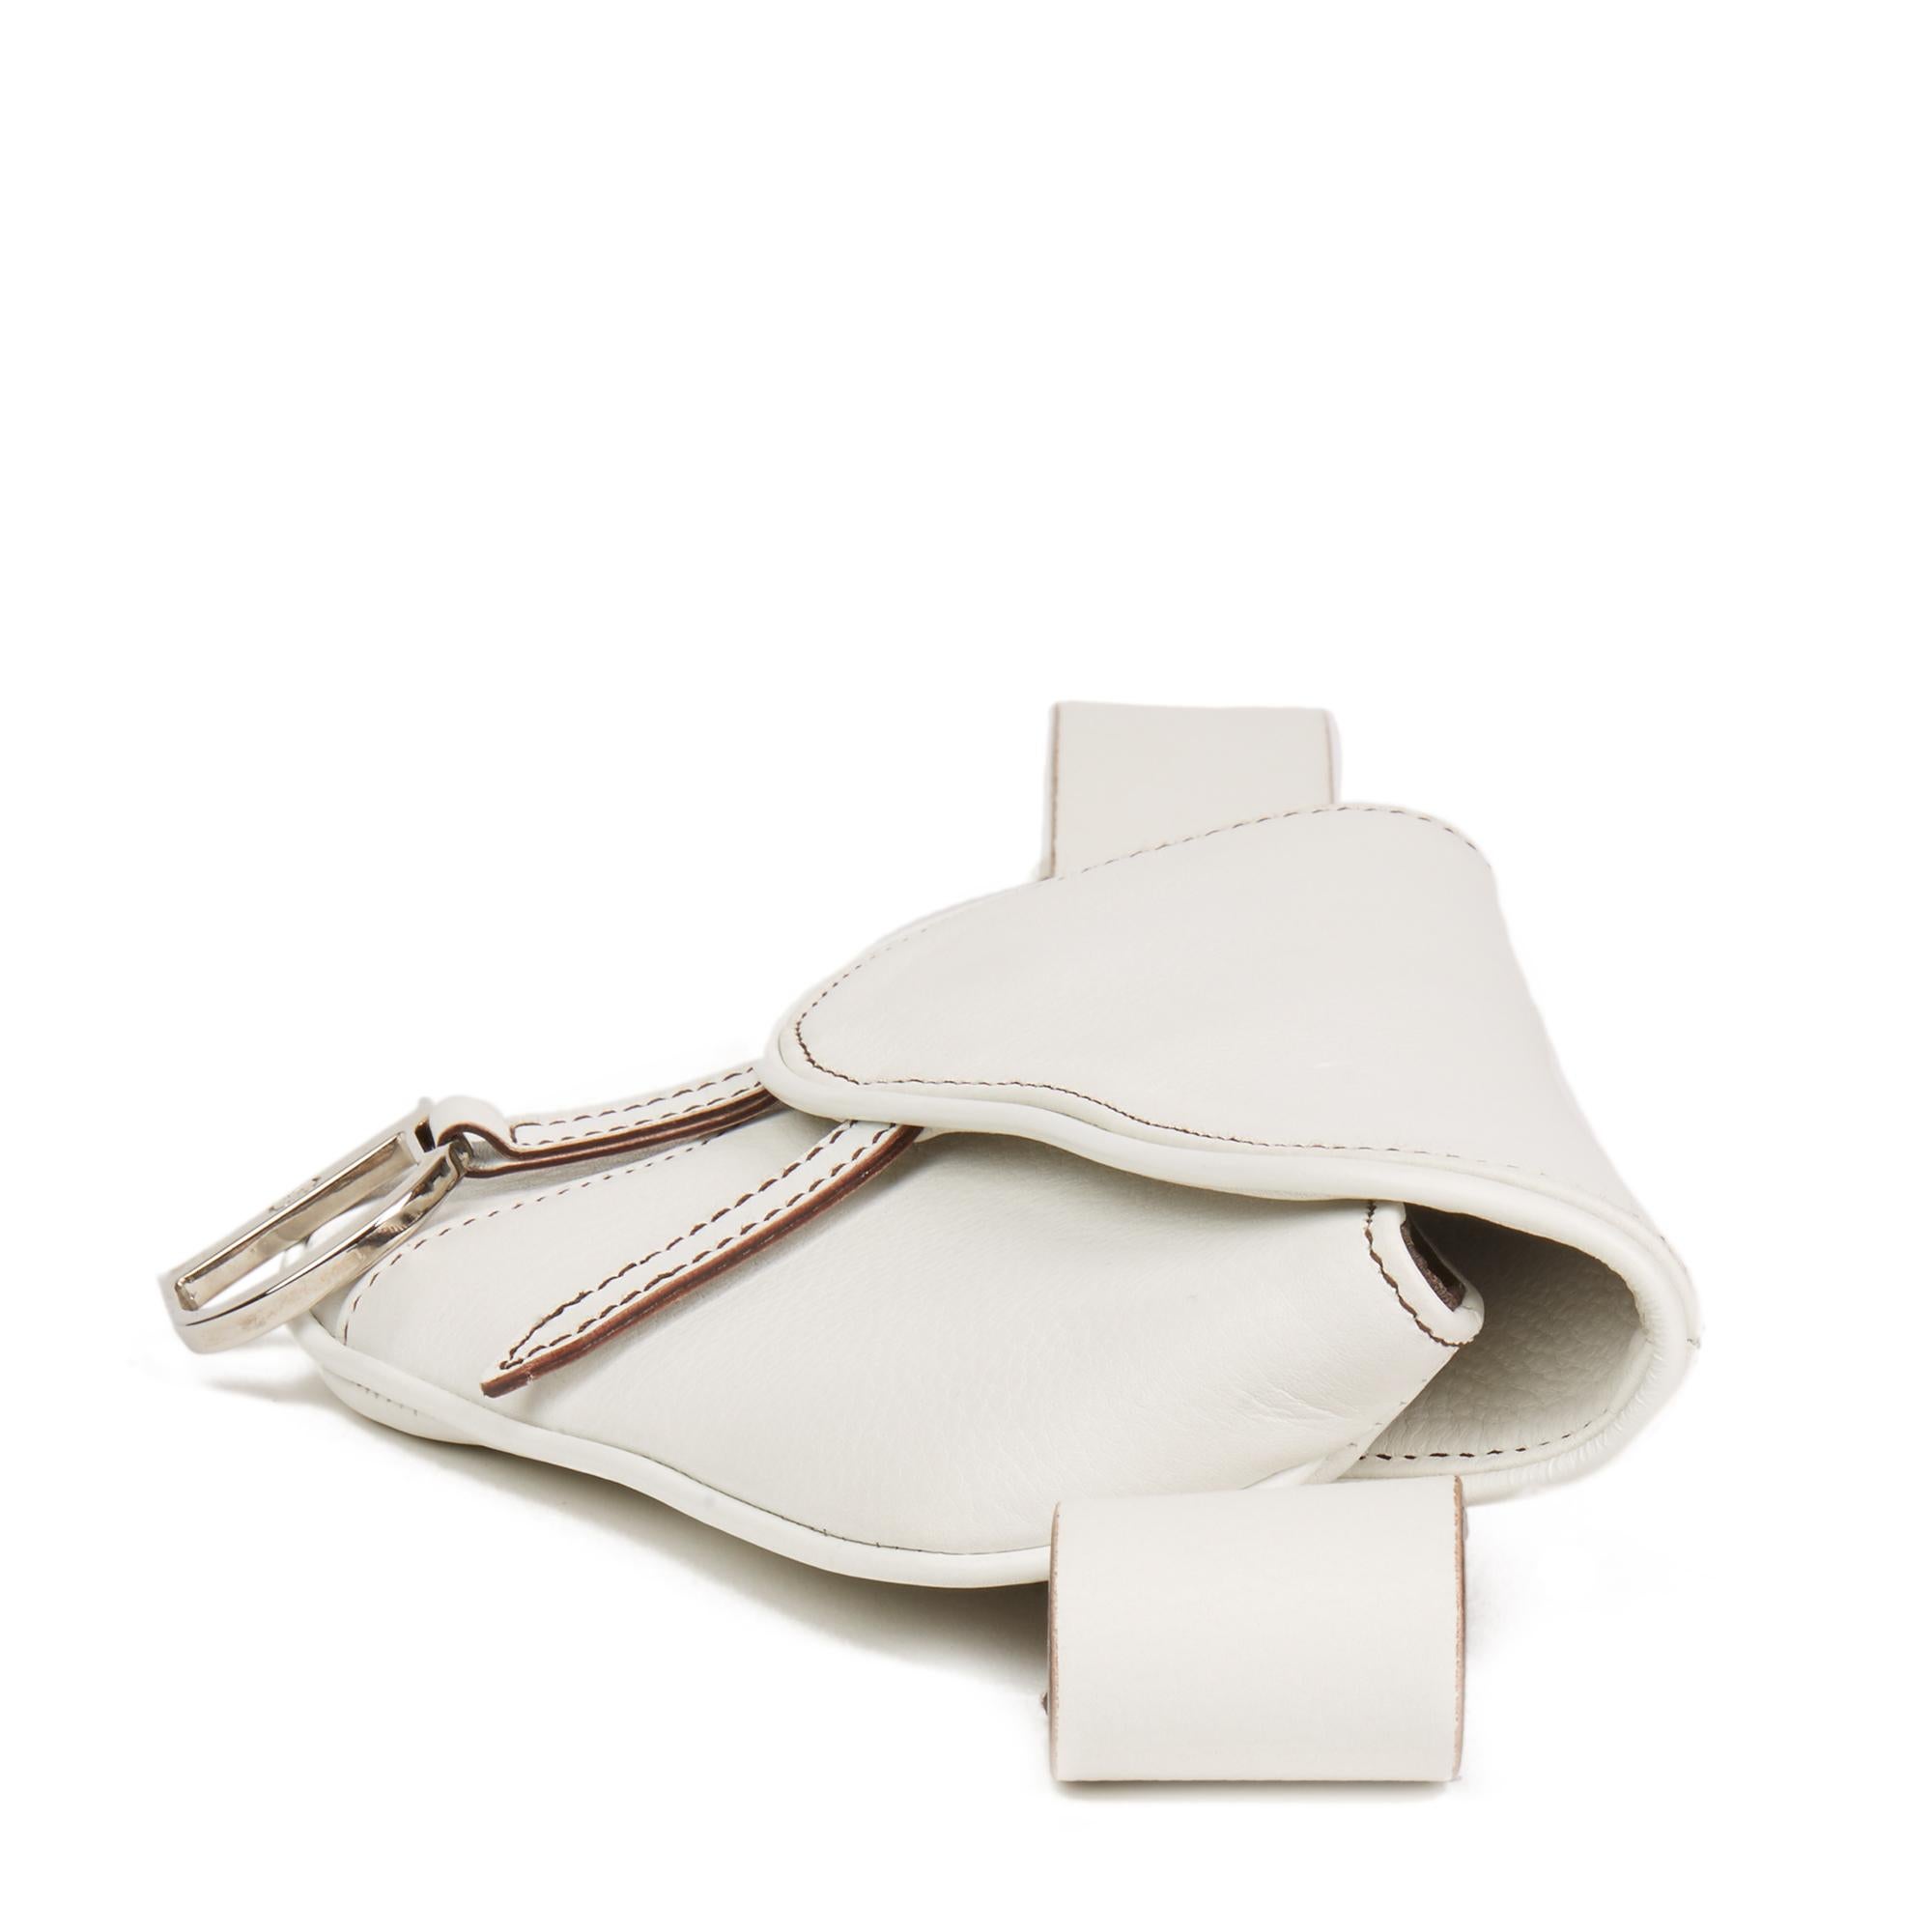 CHRISTIAN DIOR
White Calfskin Leather Saddle Belt Bag

Reference: HB2456
Serial Number: 06BM-1022
Age (Circa): 2002
Authenticity Details: Date Stamp (Made in Italy)
Gender: Ladies
Type: Belt Bag

Colour: White
Hardware: Silver
Material(s): Calfskin